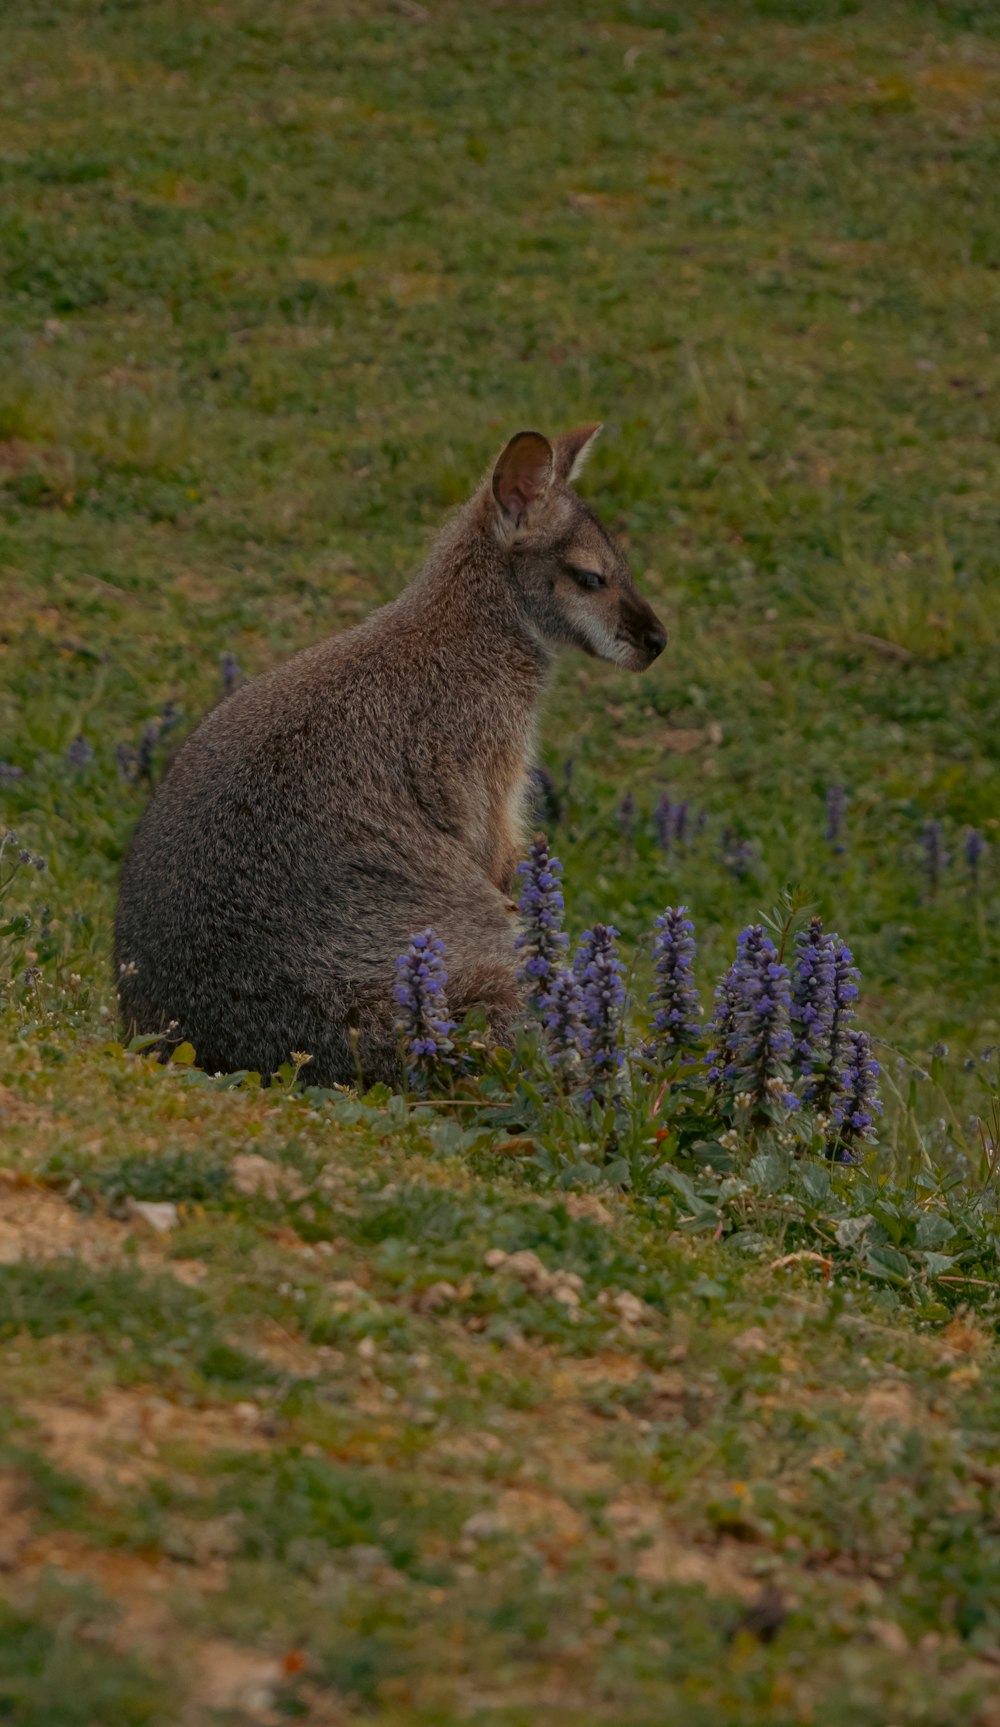 a kangaroo sitting in a field of grass and flowers